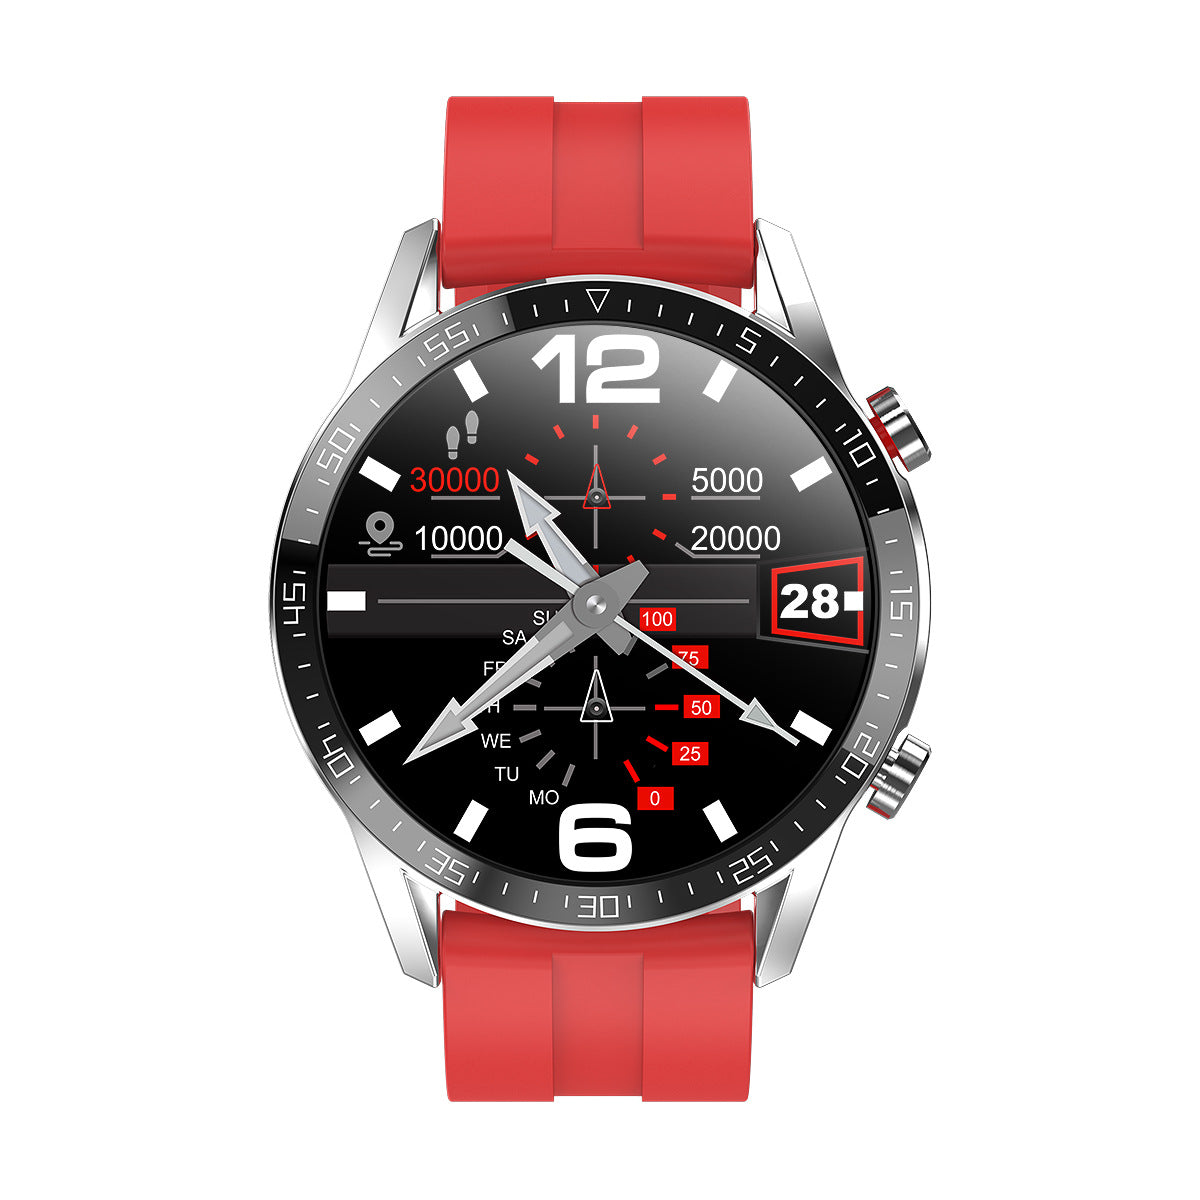 L13 Heart Rate Smart Watch - Smart Watches South Africa